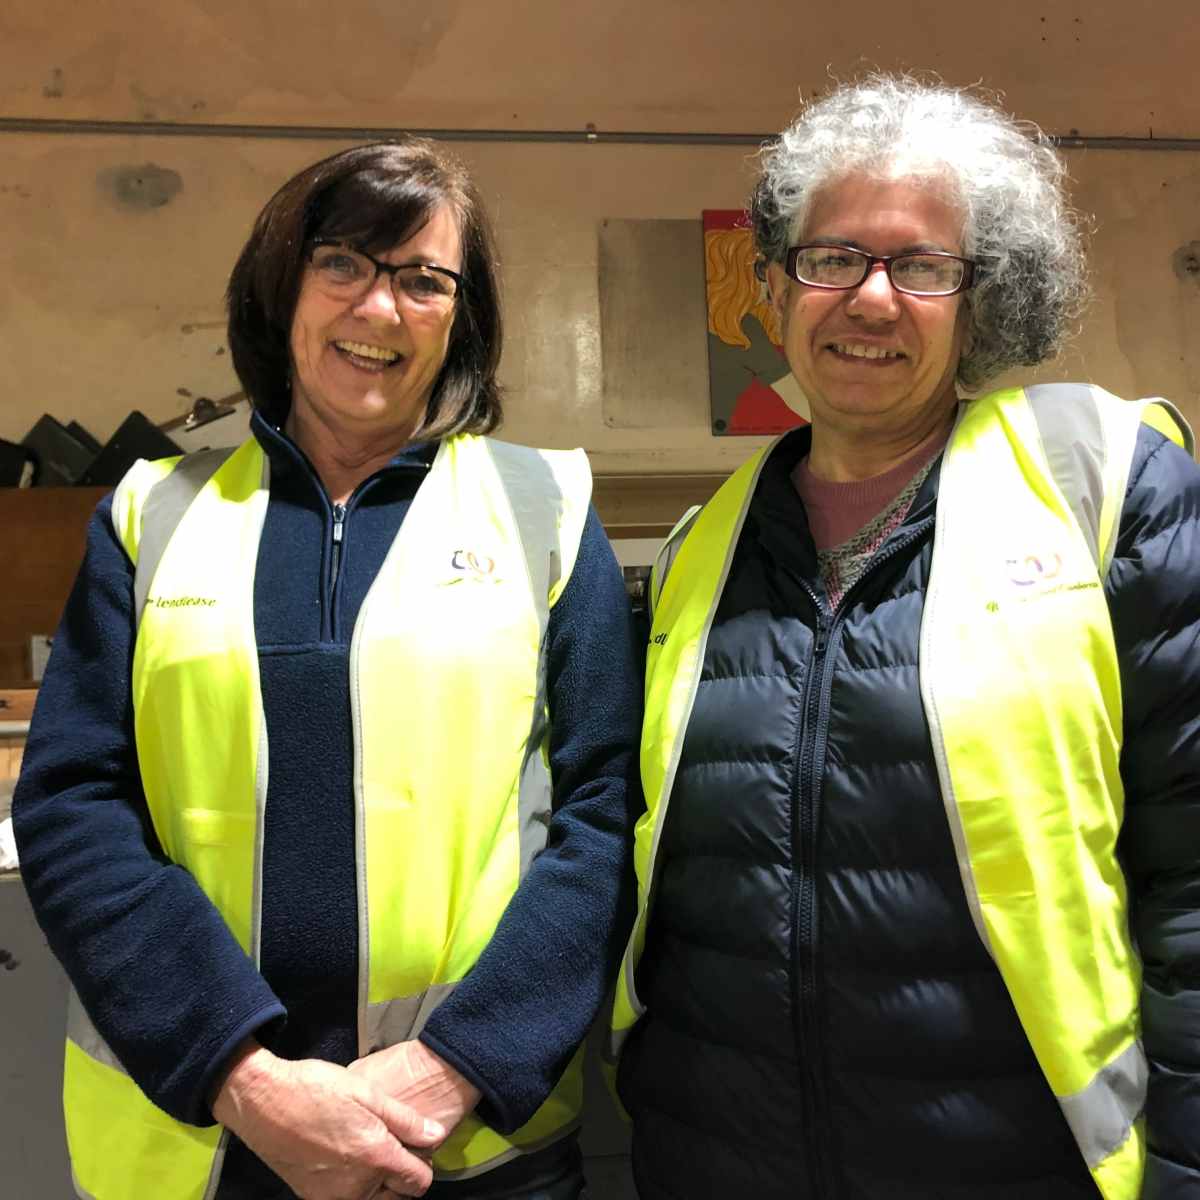 Women's Shed founders Sunita Kotnala and Roby McGarvey standing side by side in high vis vests